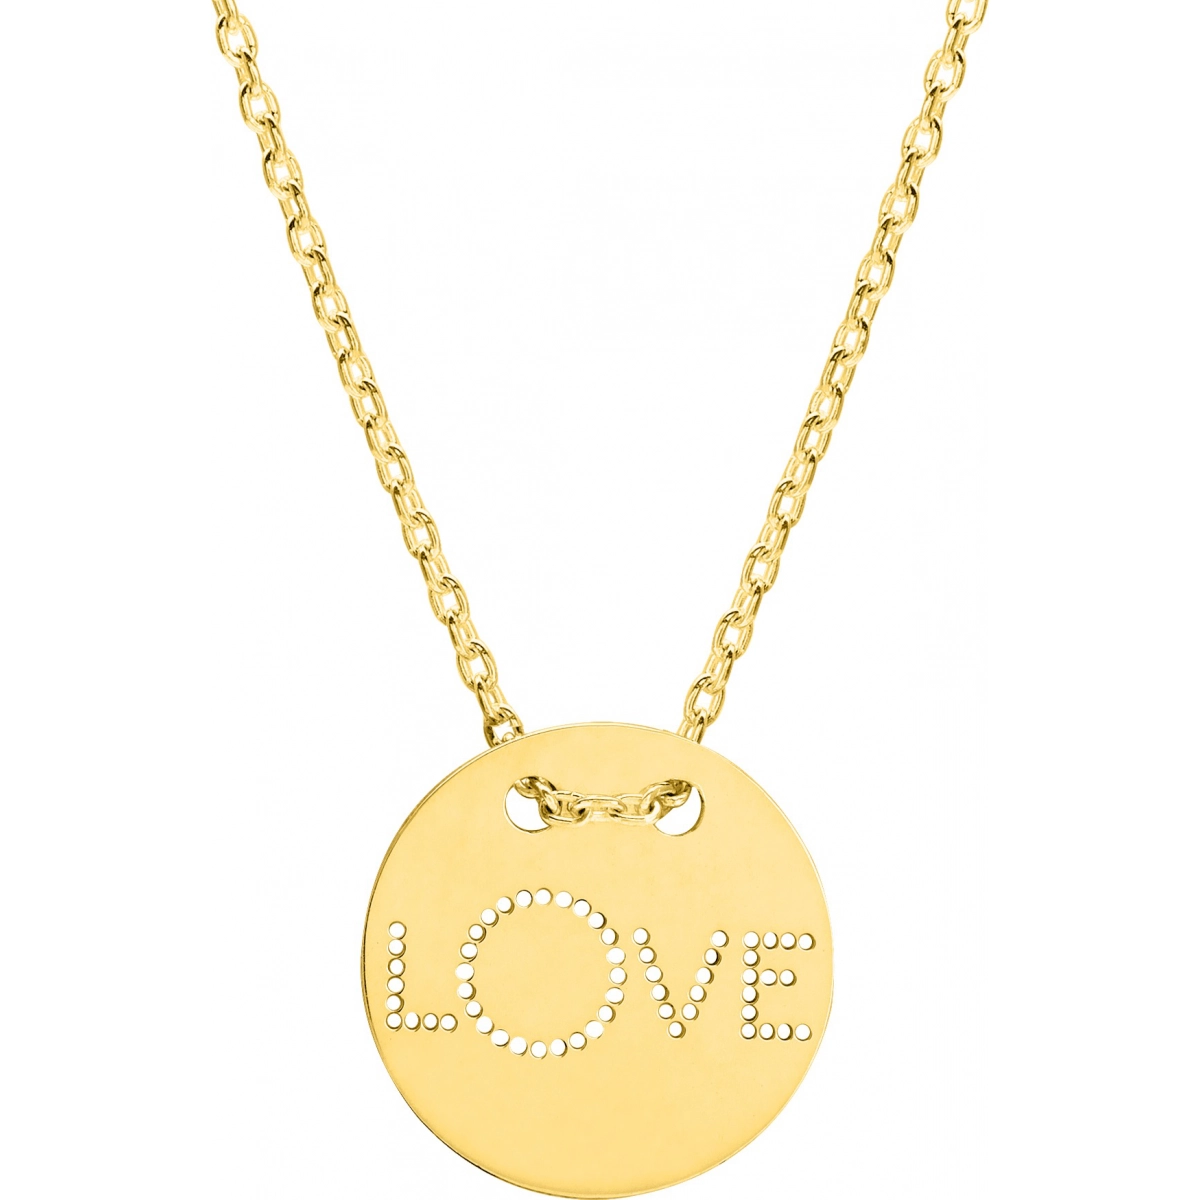 COLLIER PLAQUE OR - Taille: 42  Lua Blanca  102810.42